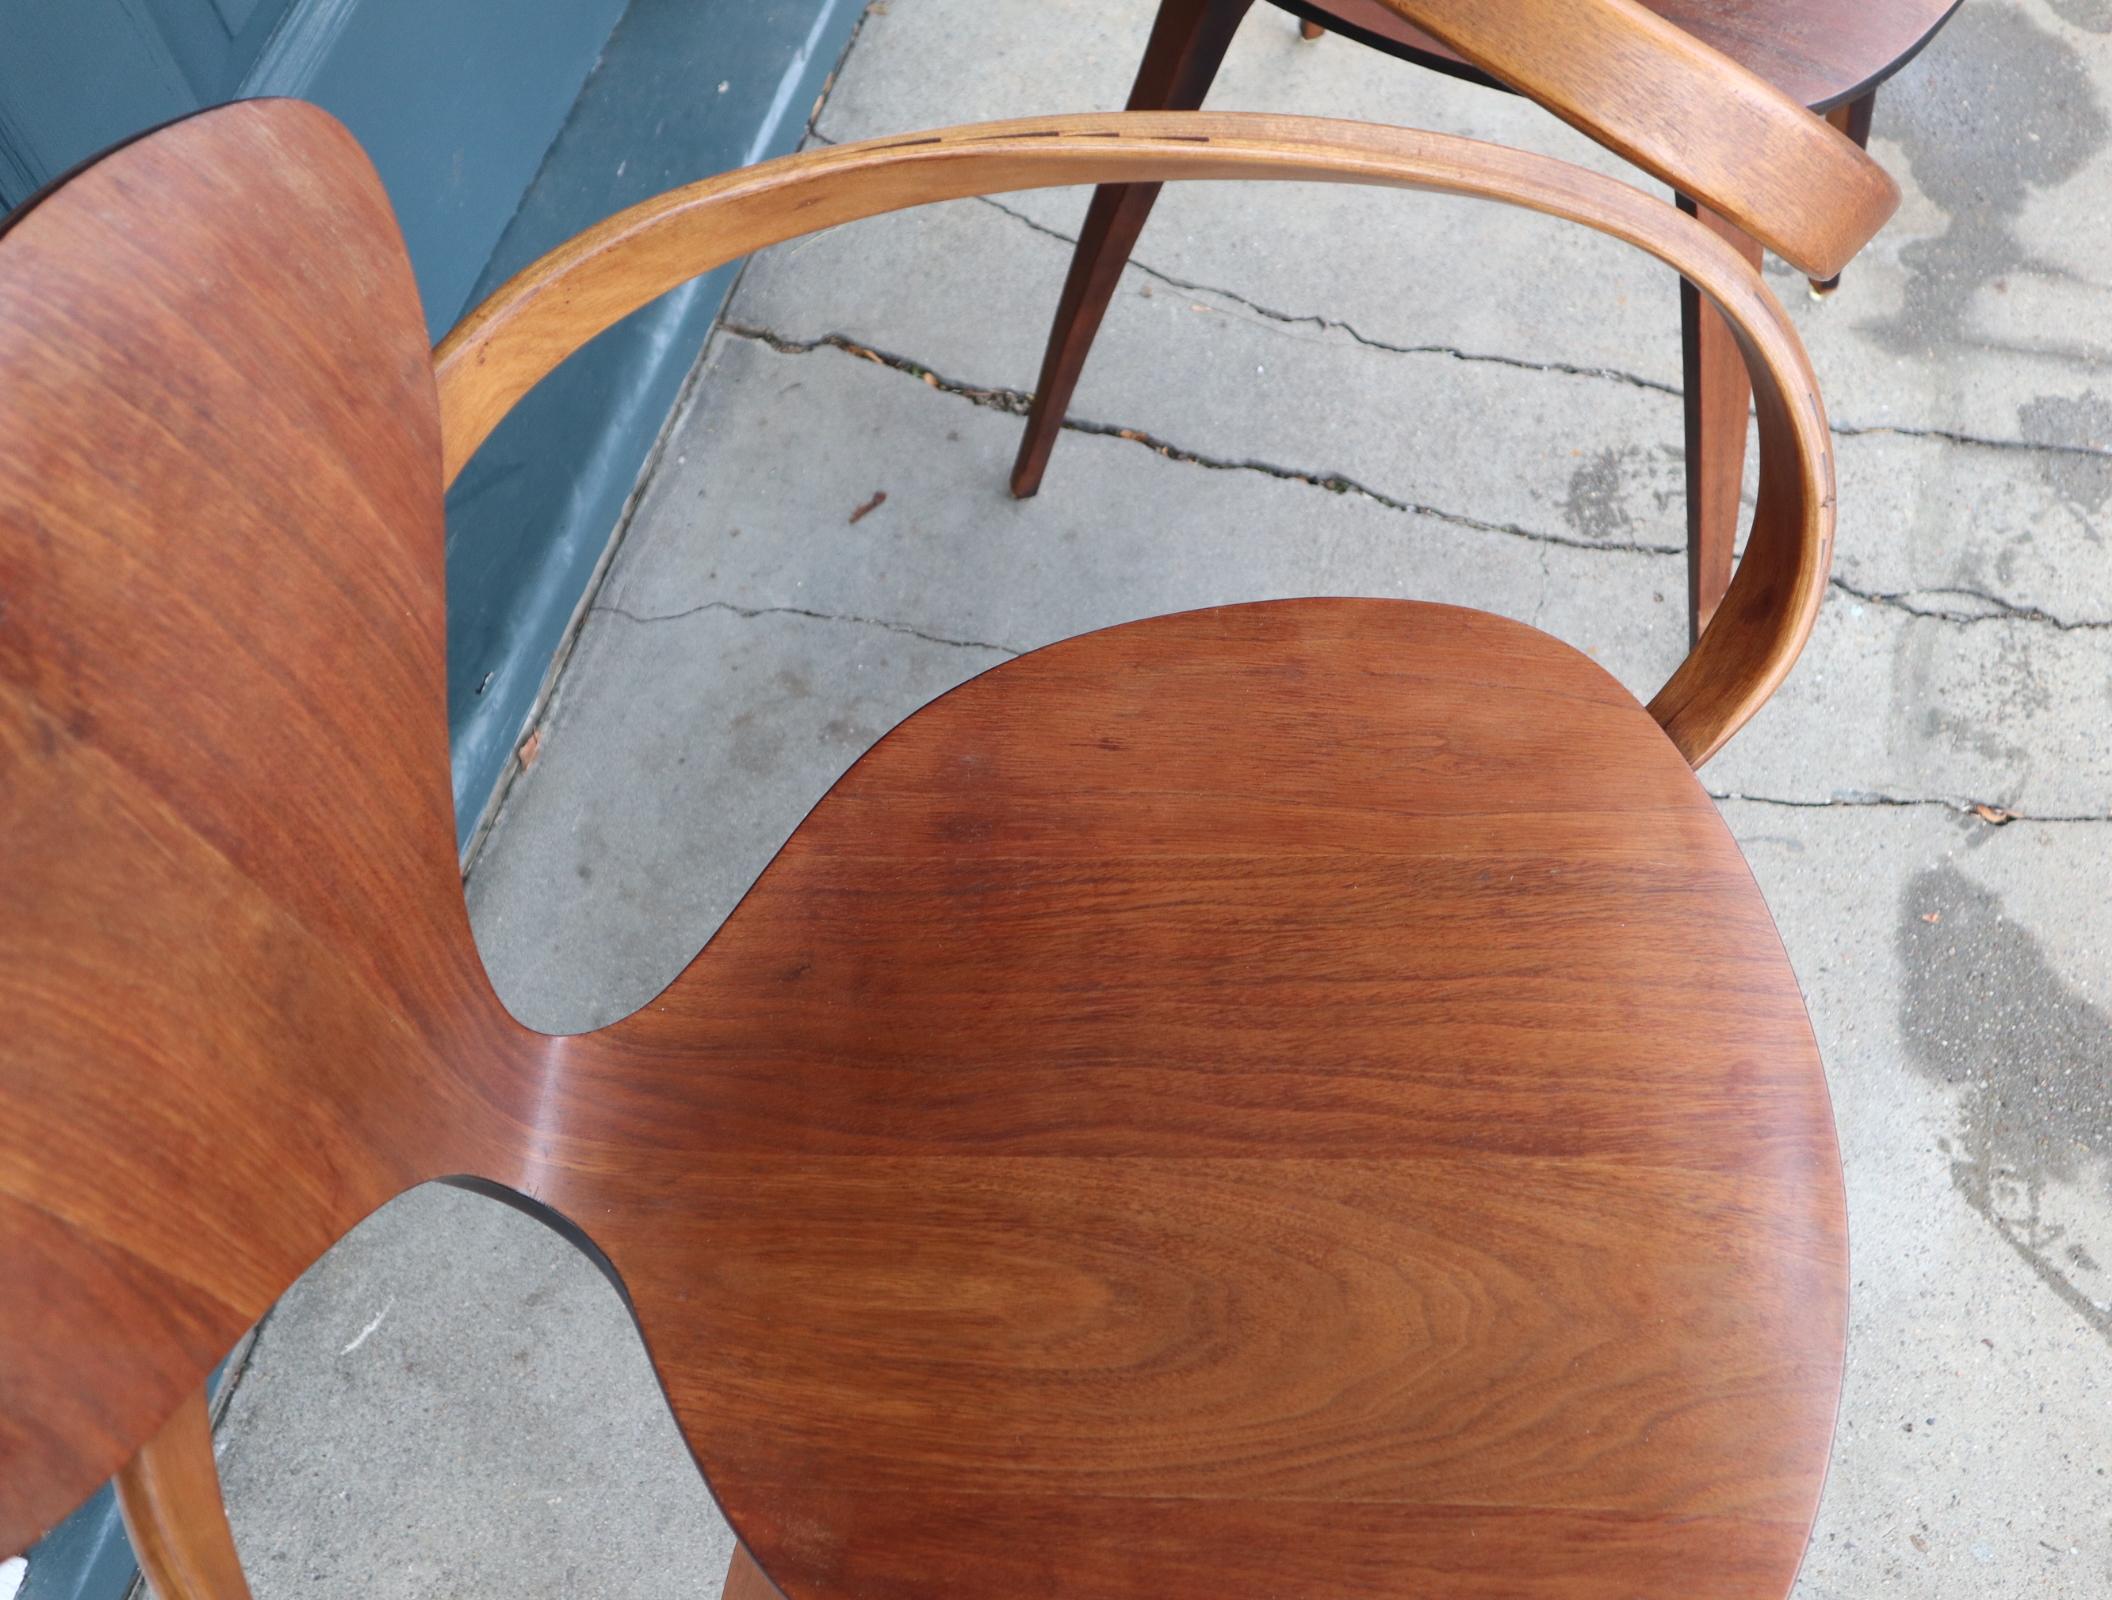 American Pair of Norman Cherner Bentwood Pretzel Chairs in Walnut for Plycraft